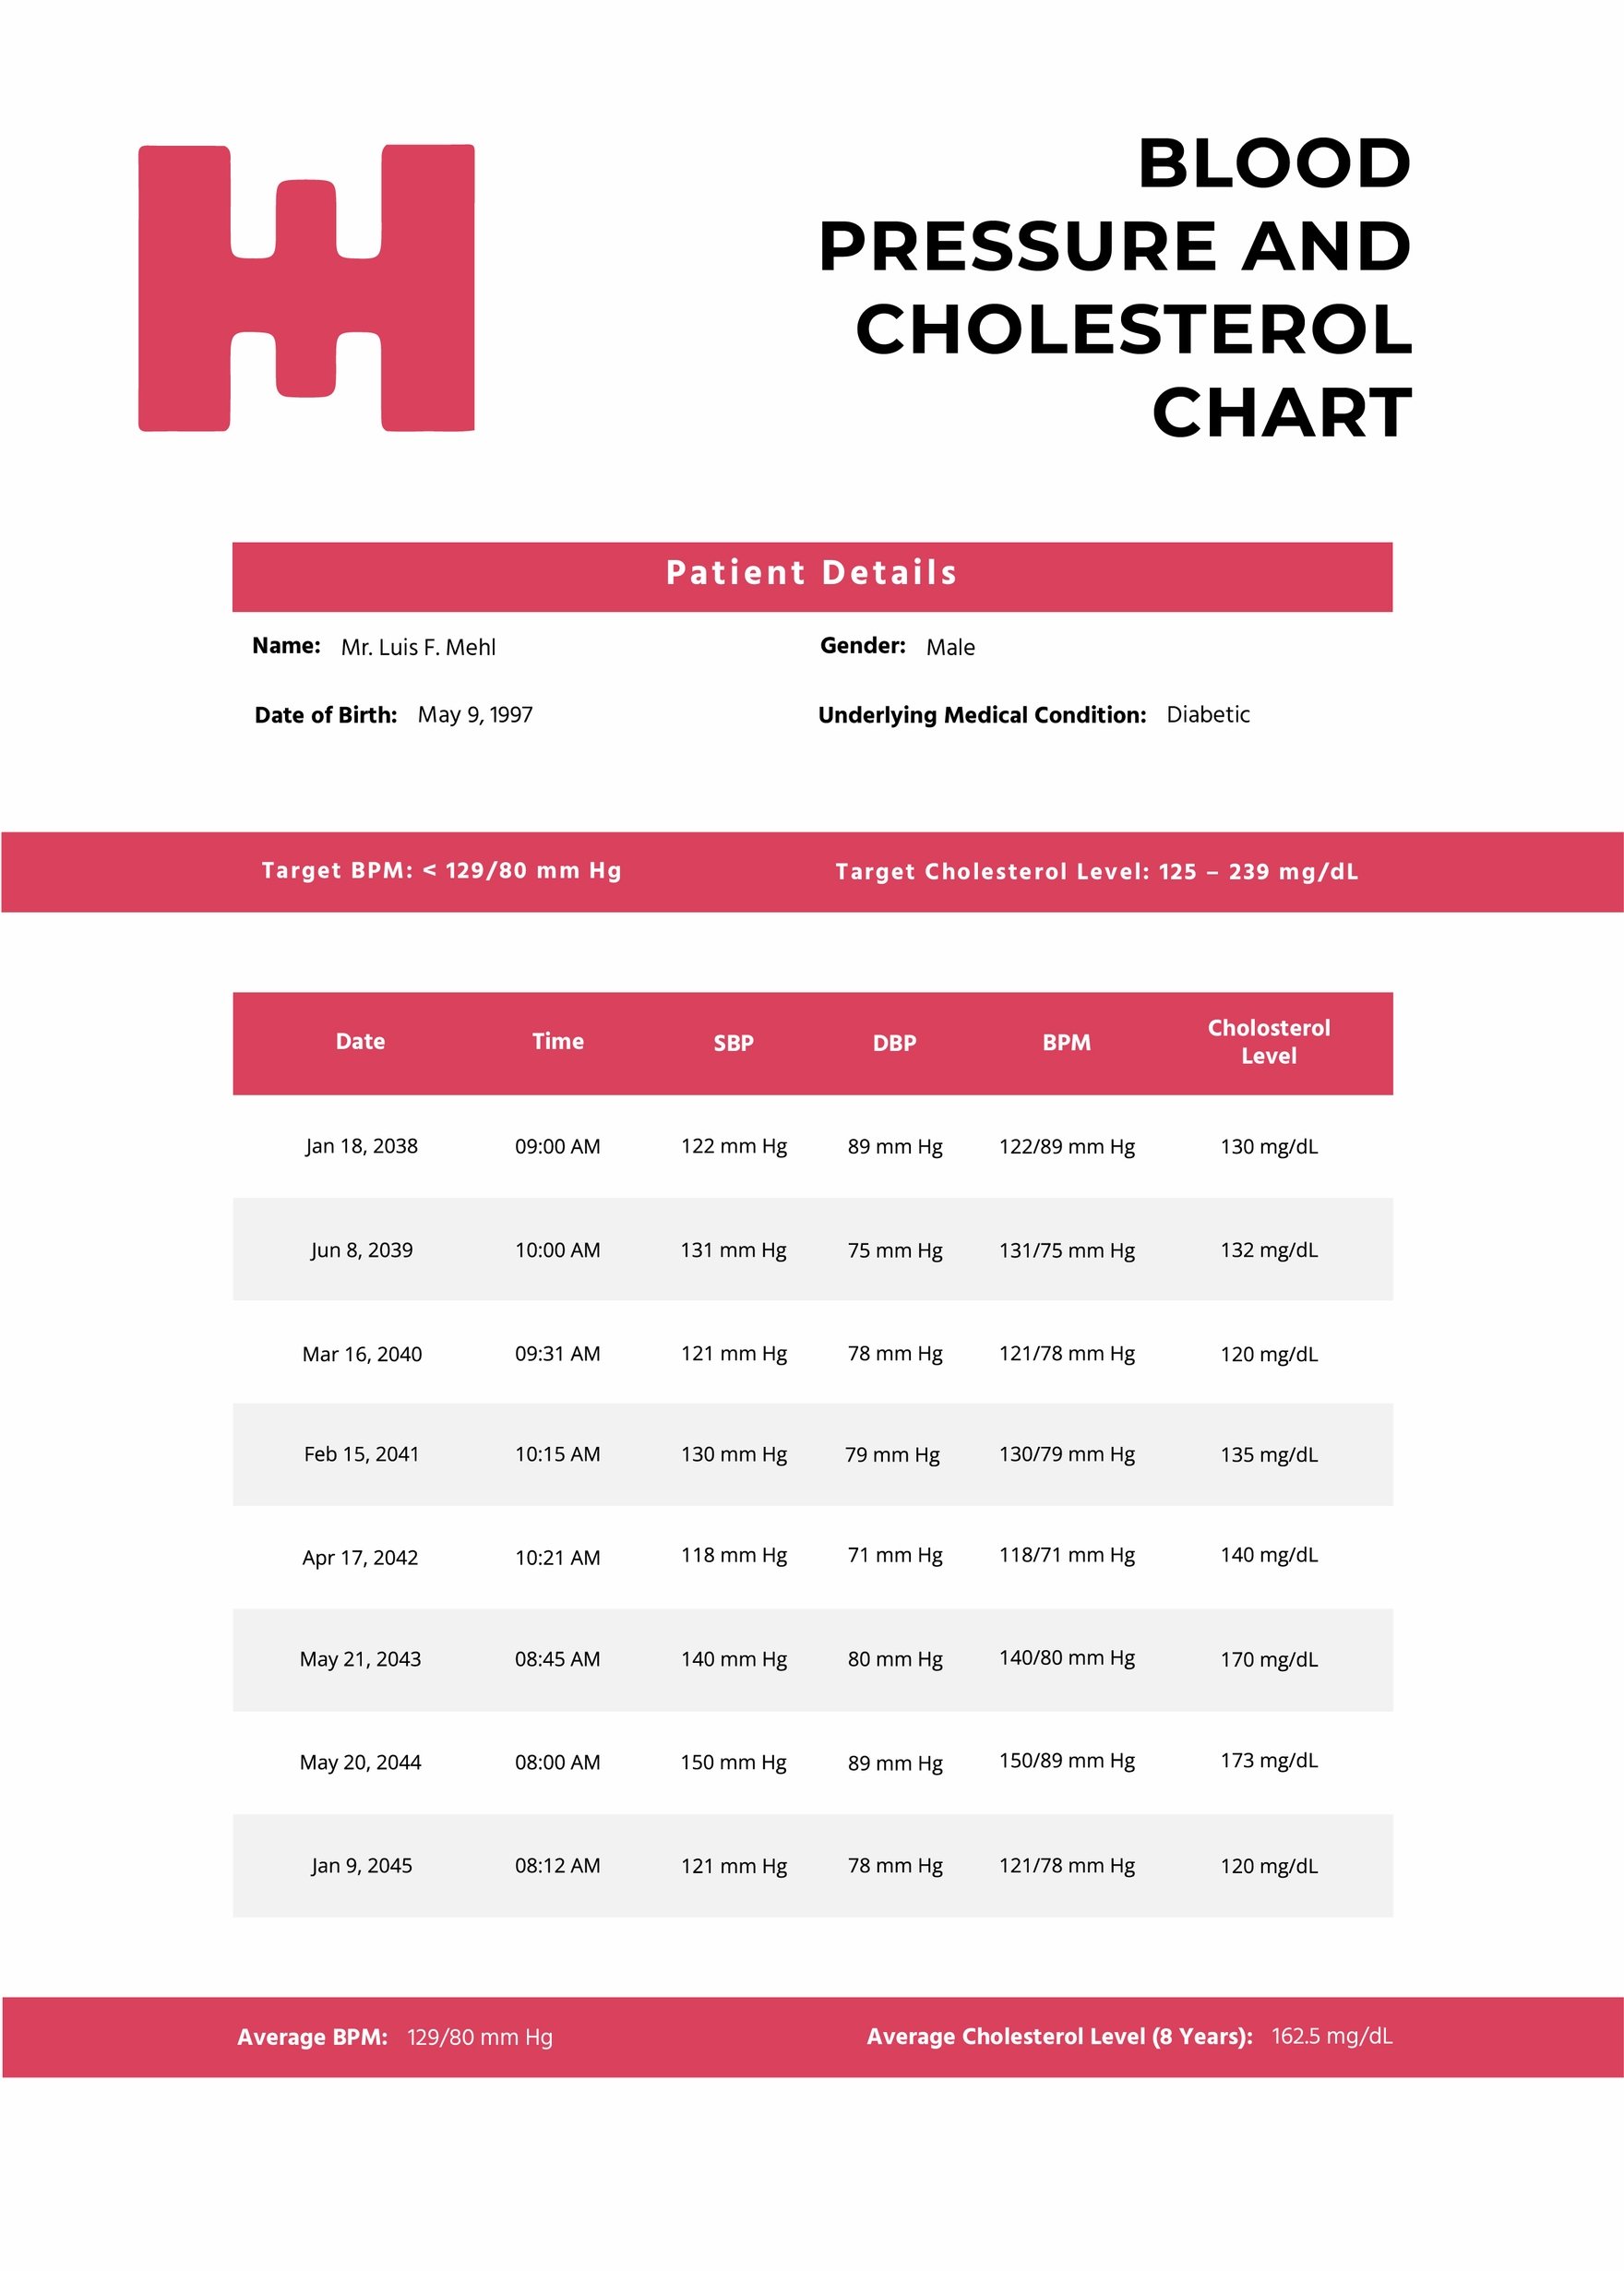 Blood Pressure and Cholesterol Chart Template